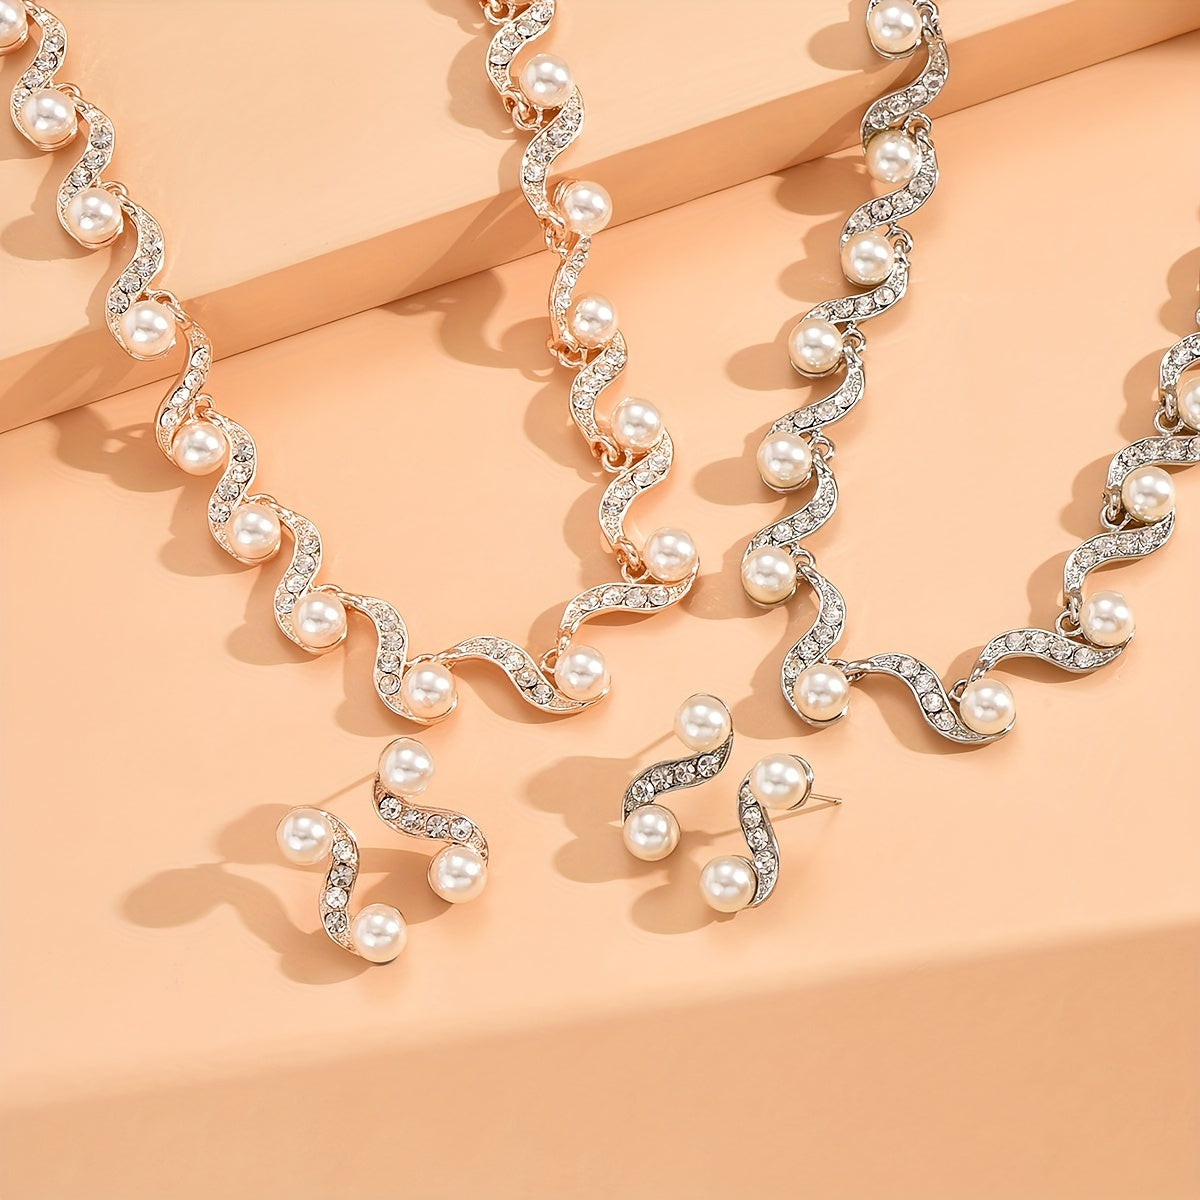 Make a Statement on Your Big Day with this Bridal Jewelry Set - Wave Shape Choker Necklace and Drop Earrings with Inlaid Faux Pearls, Perfect for Prom Party